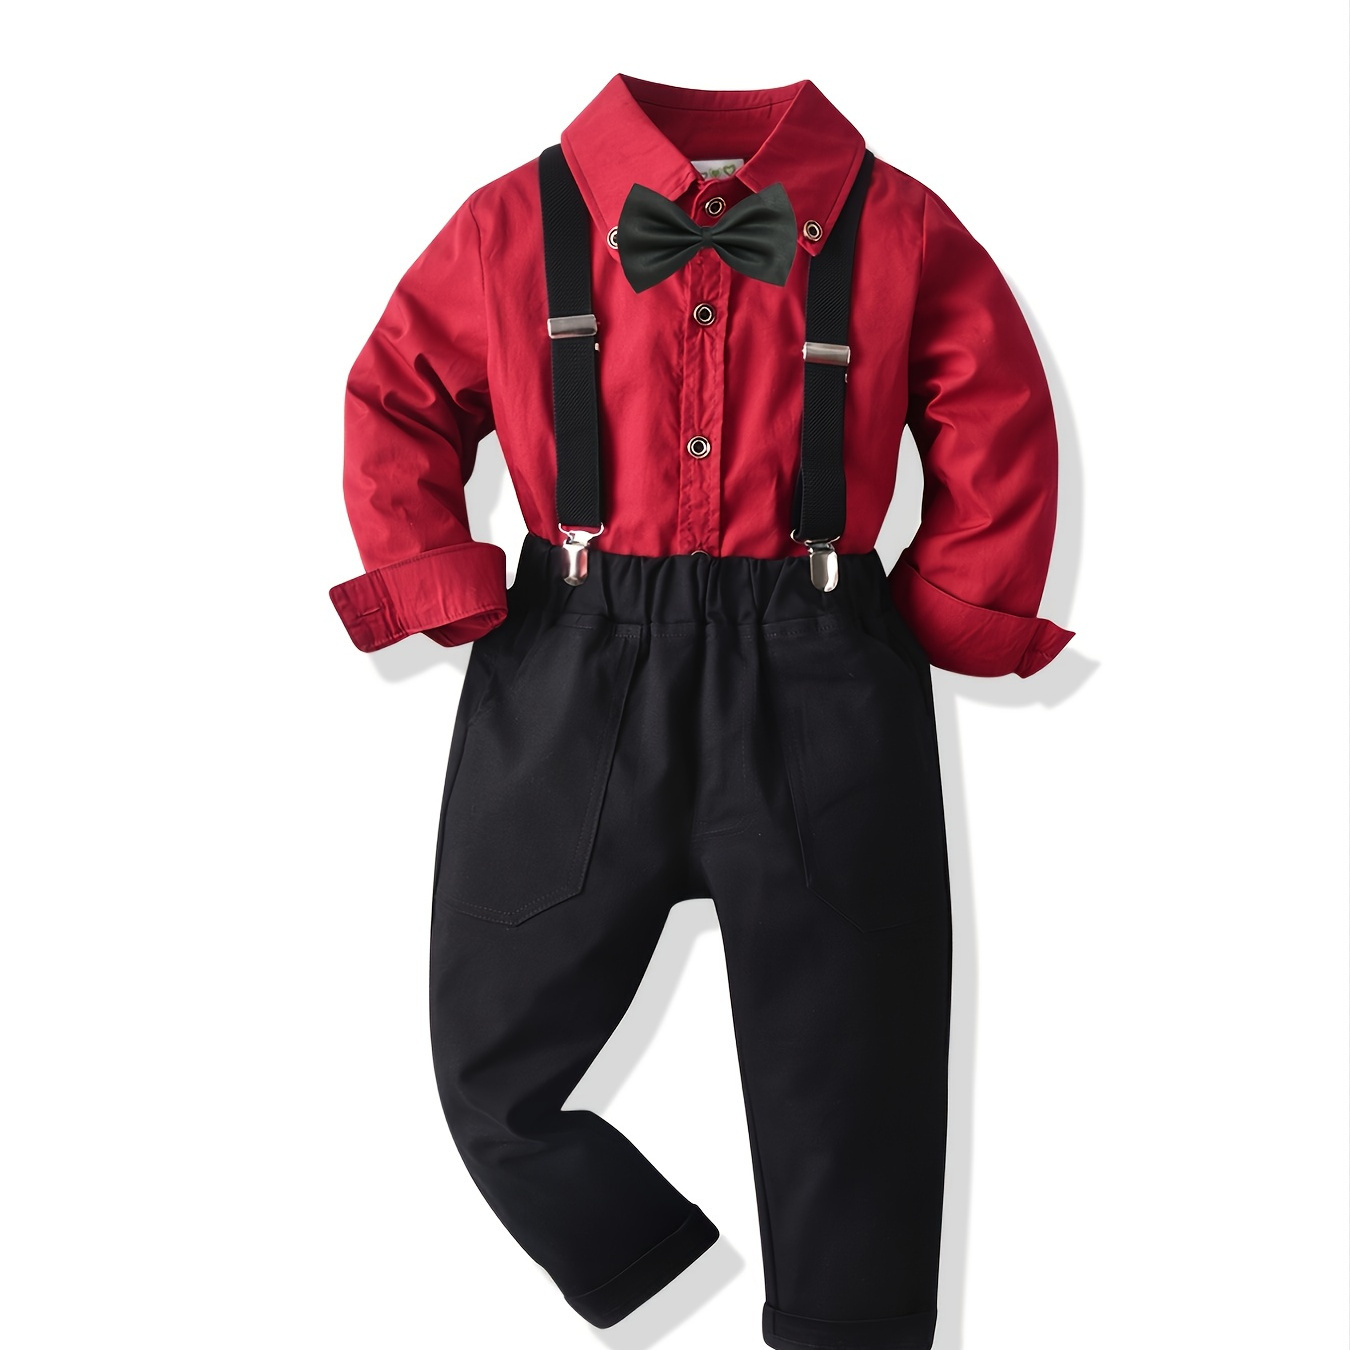 

Toddler Boy's Gentleman Outfit 2pcs, Bowtie Decor Shirt & Overalls Set, Kid's Clothes For Speech Performance Birthday Party